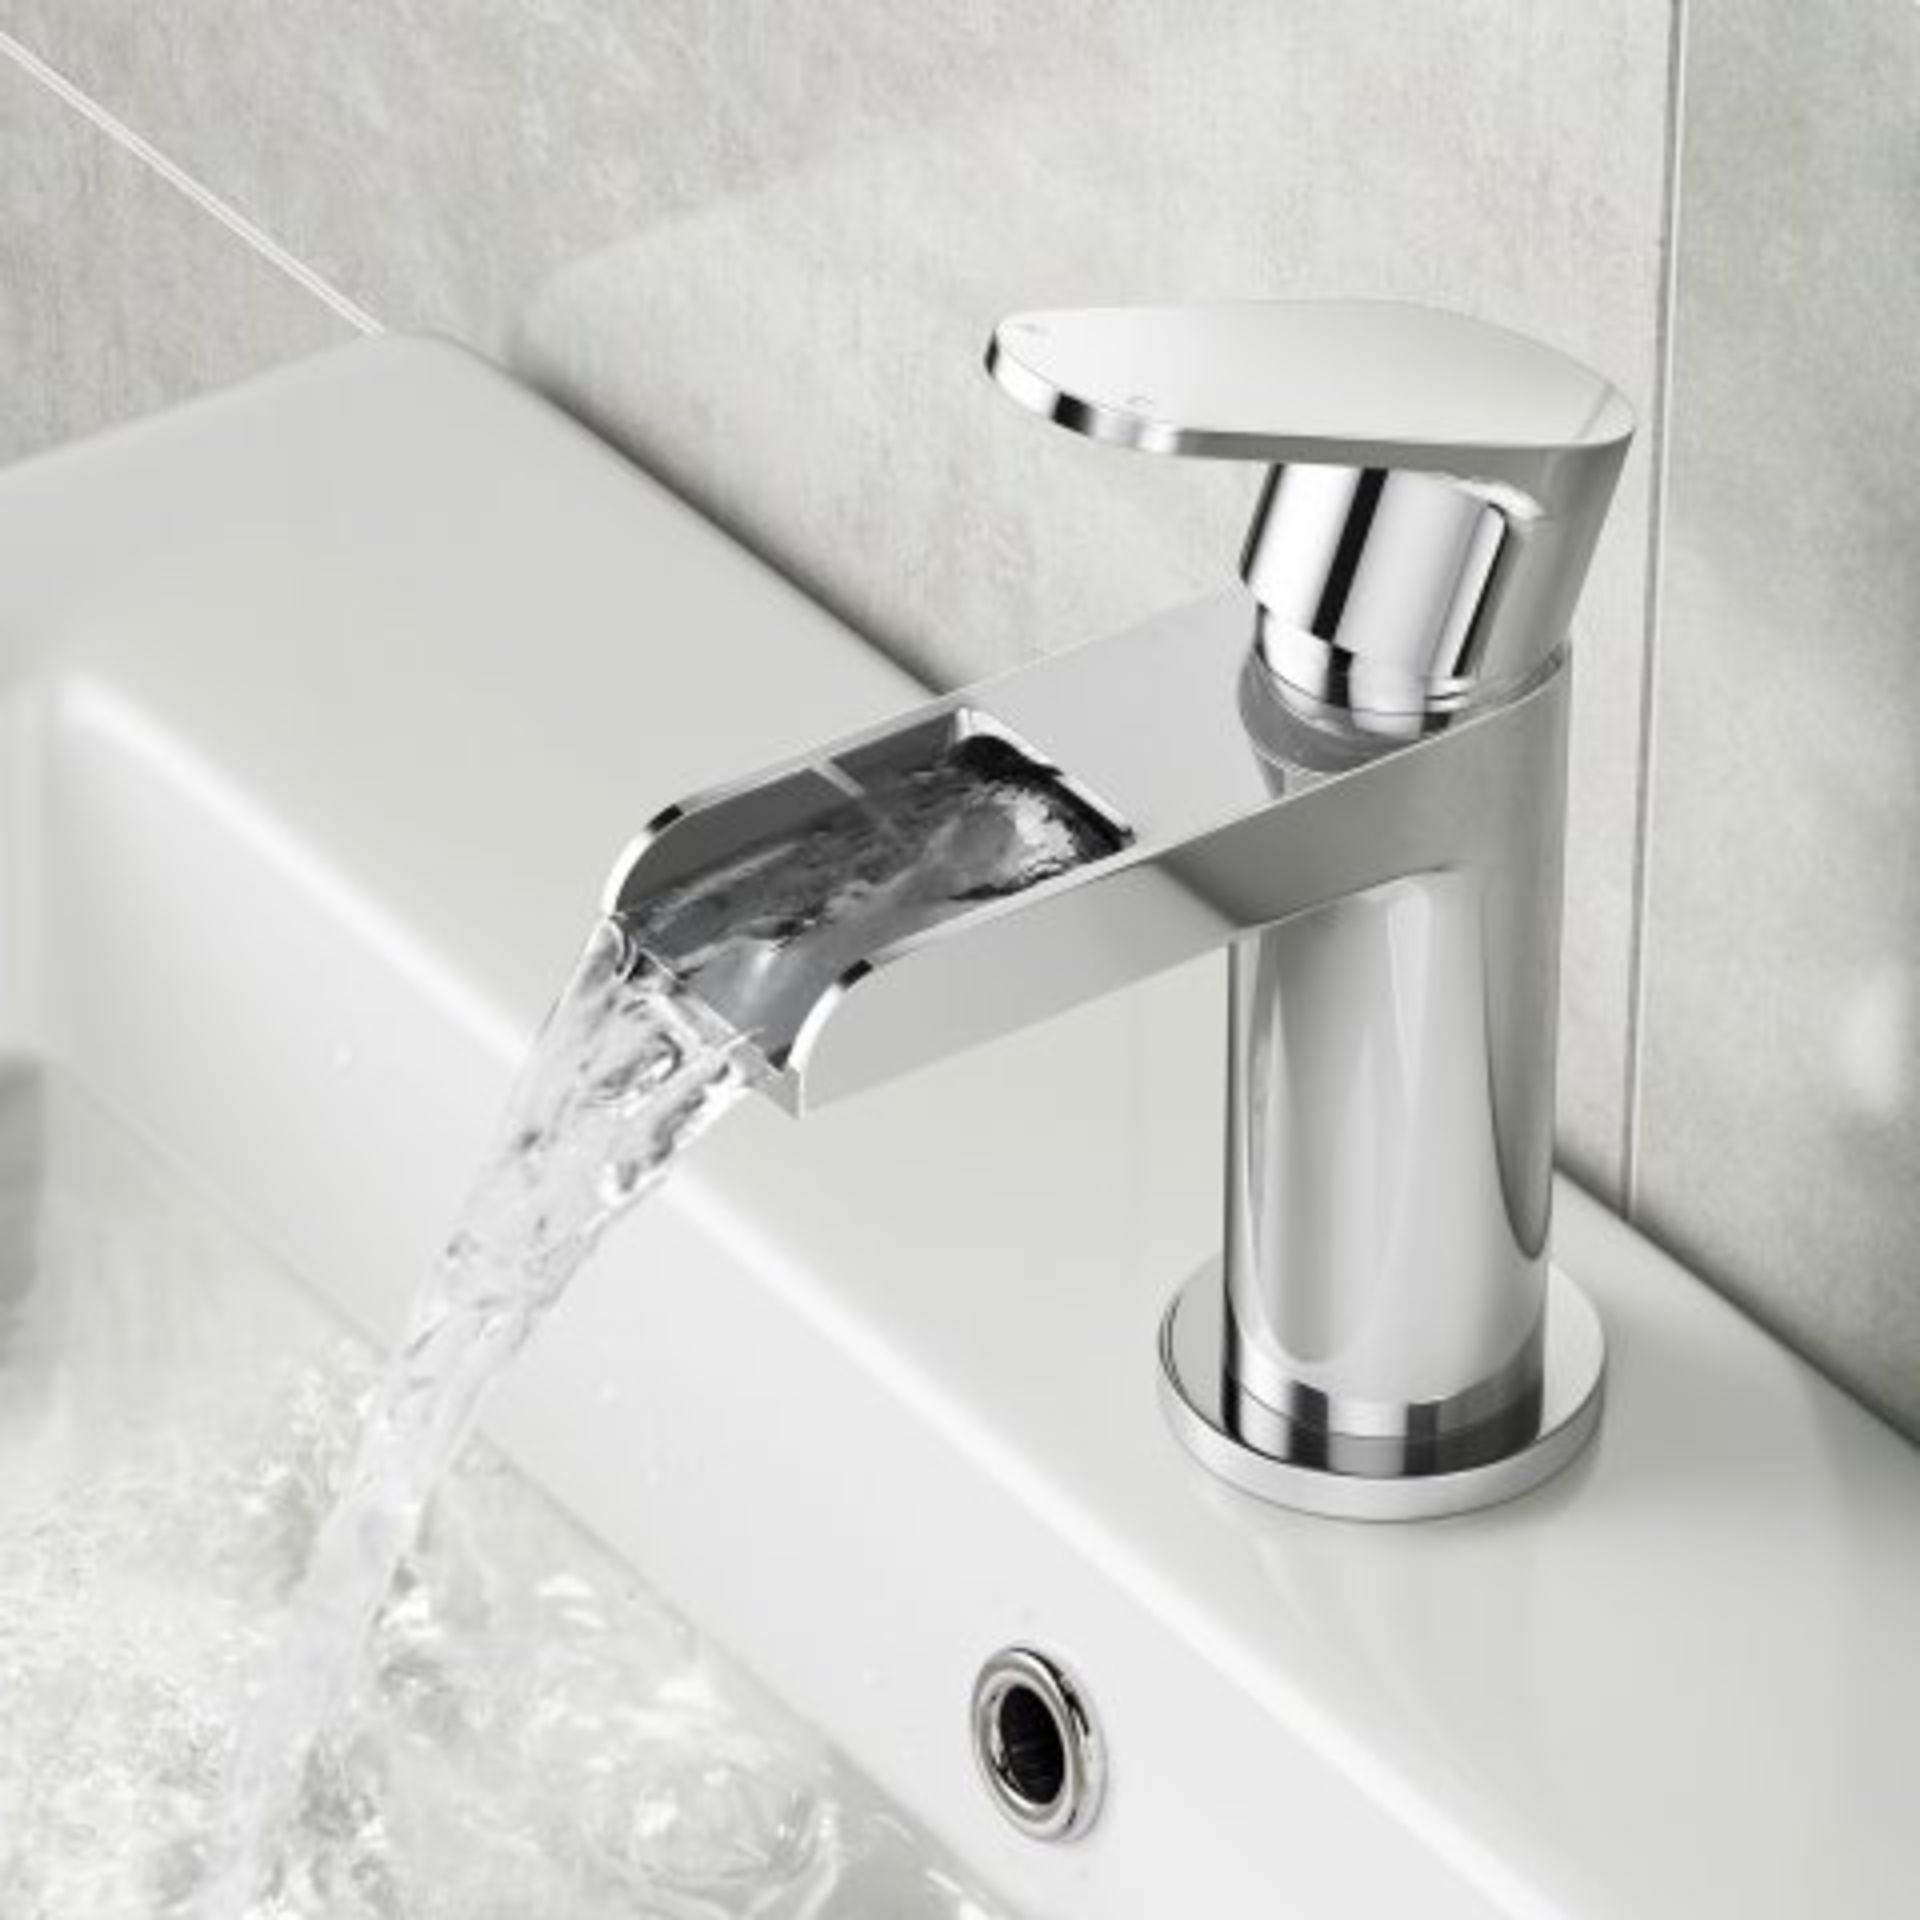 (V103) Cela Waterfall Basin Mixer Tap Presenting a contemporary design, this solid brass tap has